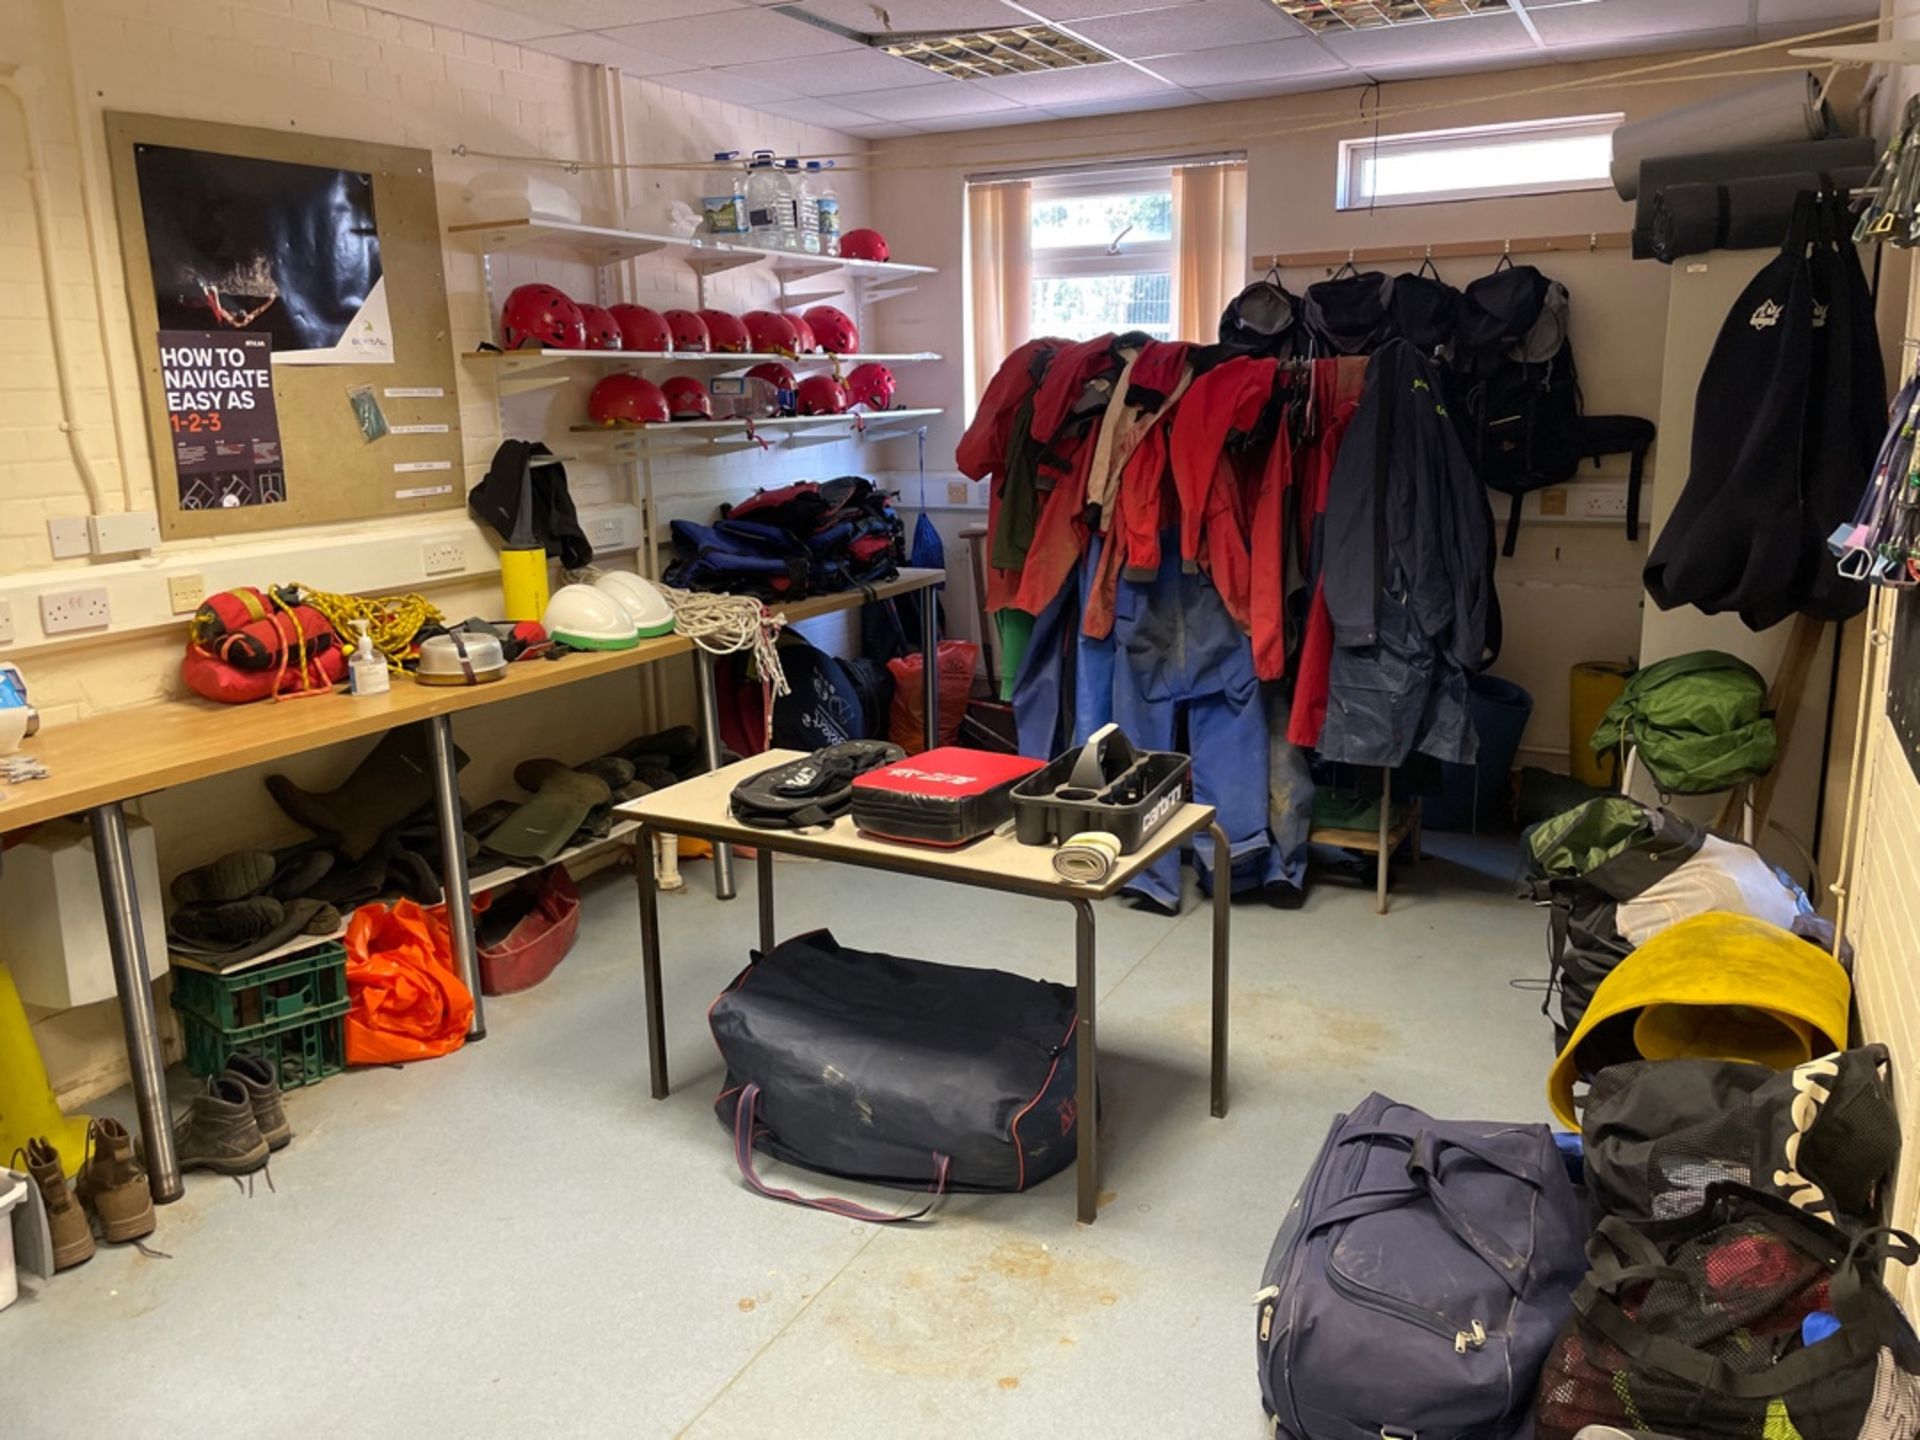 Contents Of Outdoor Pursuits Room - Image 10 of 10